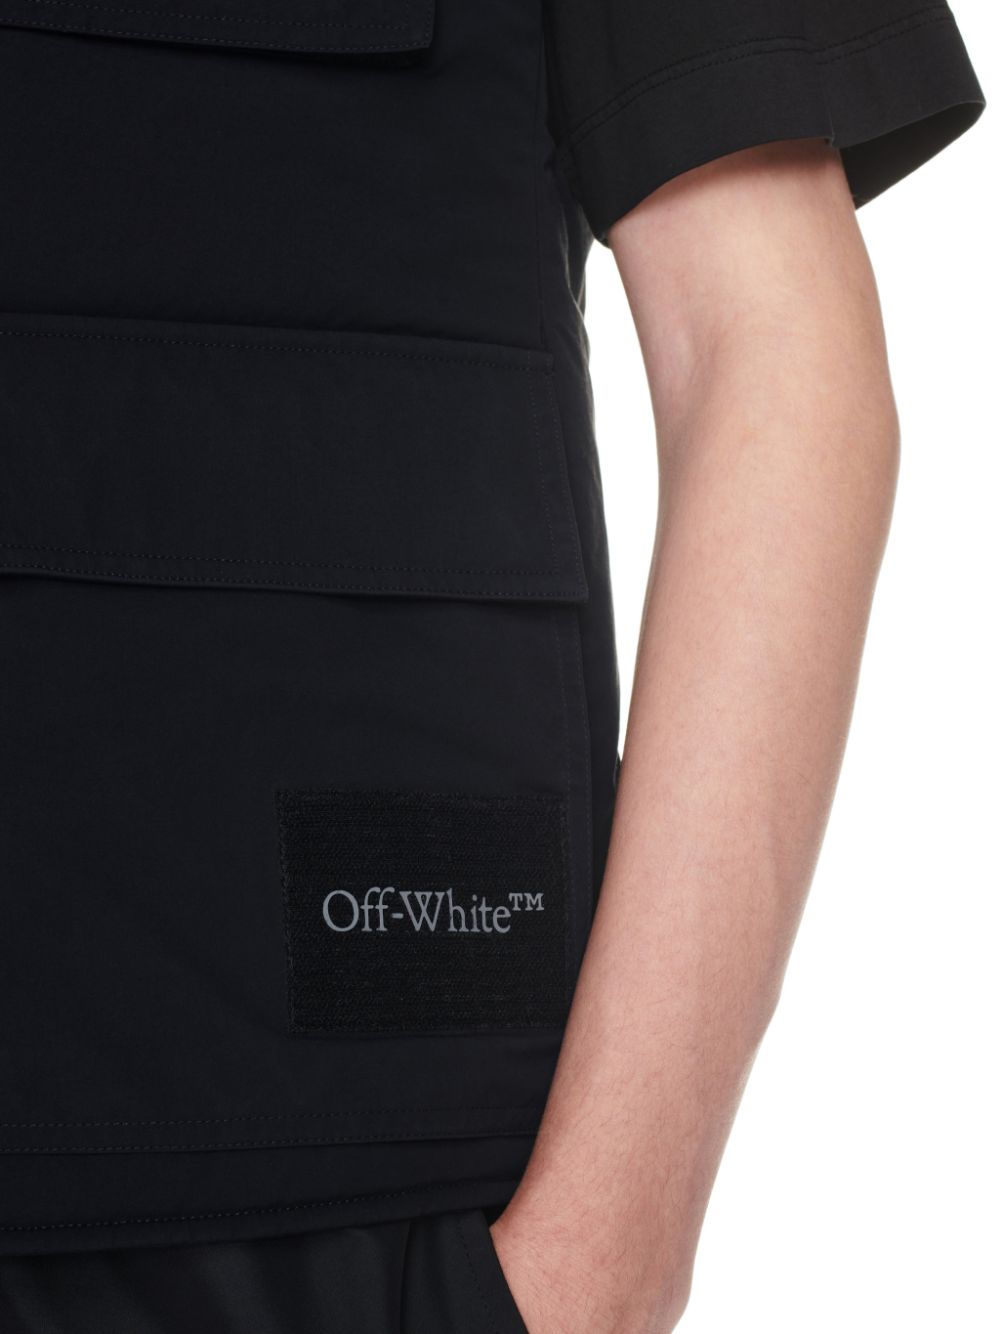 Off-WhiteWave Tag Padded Vest at Fashion Clinic